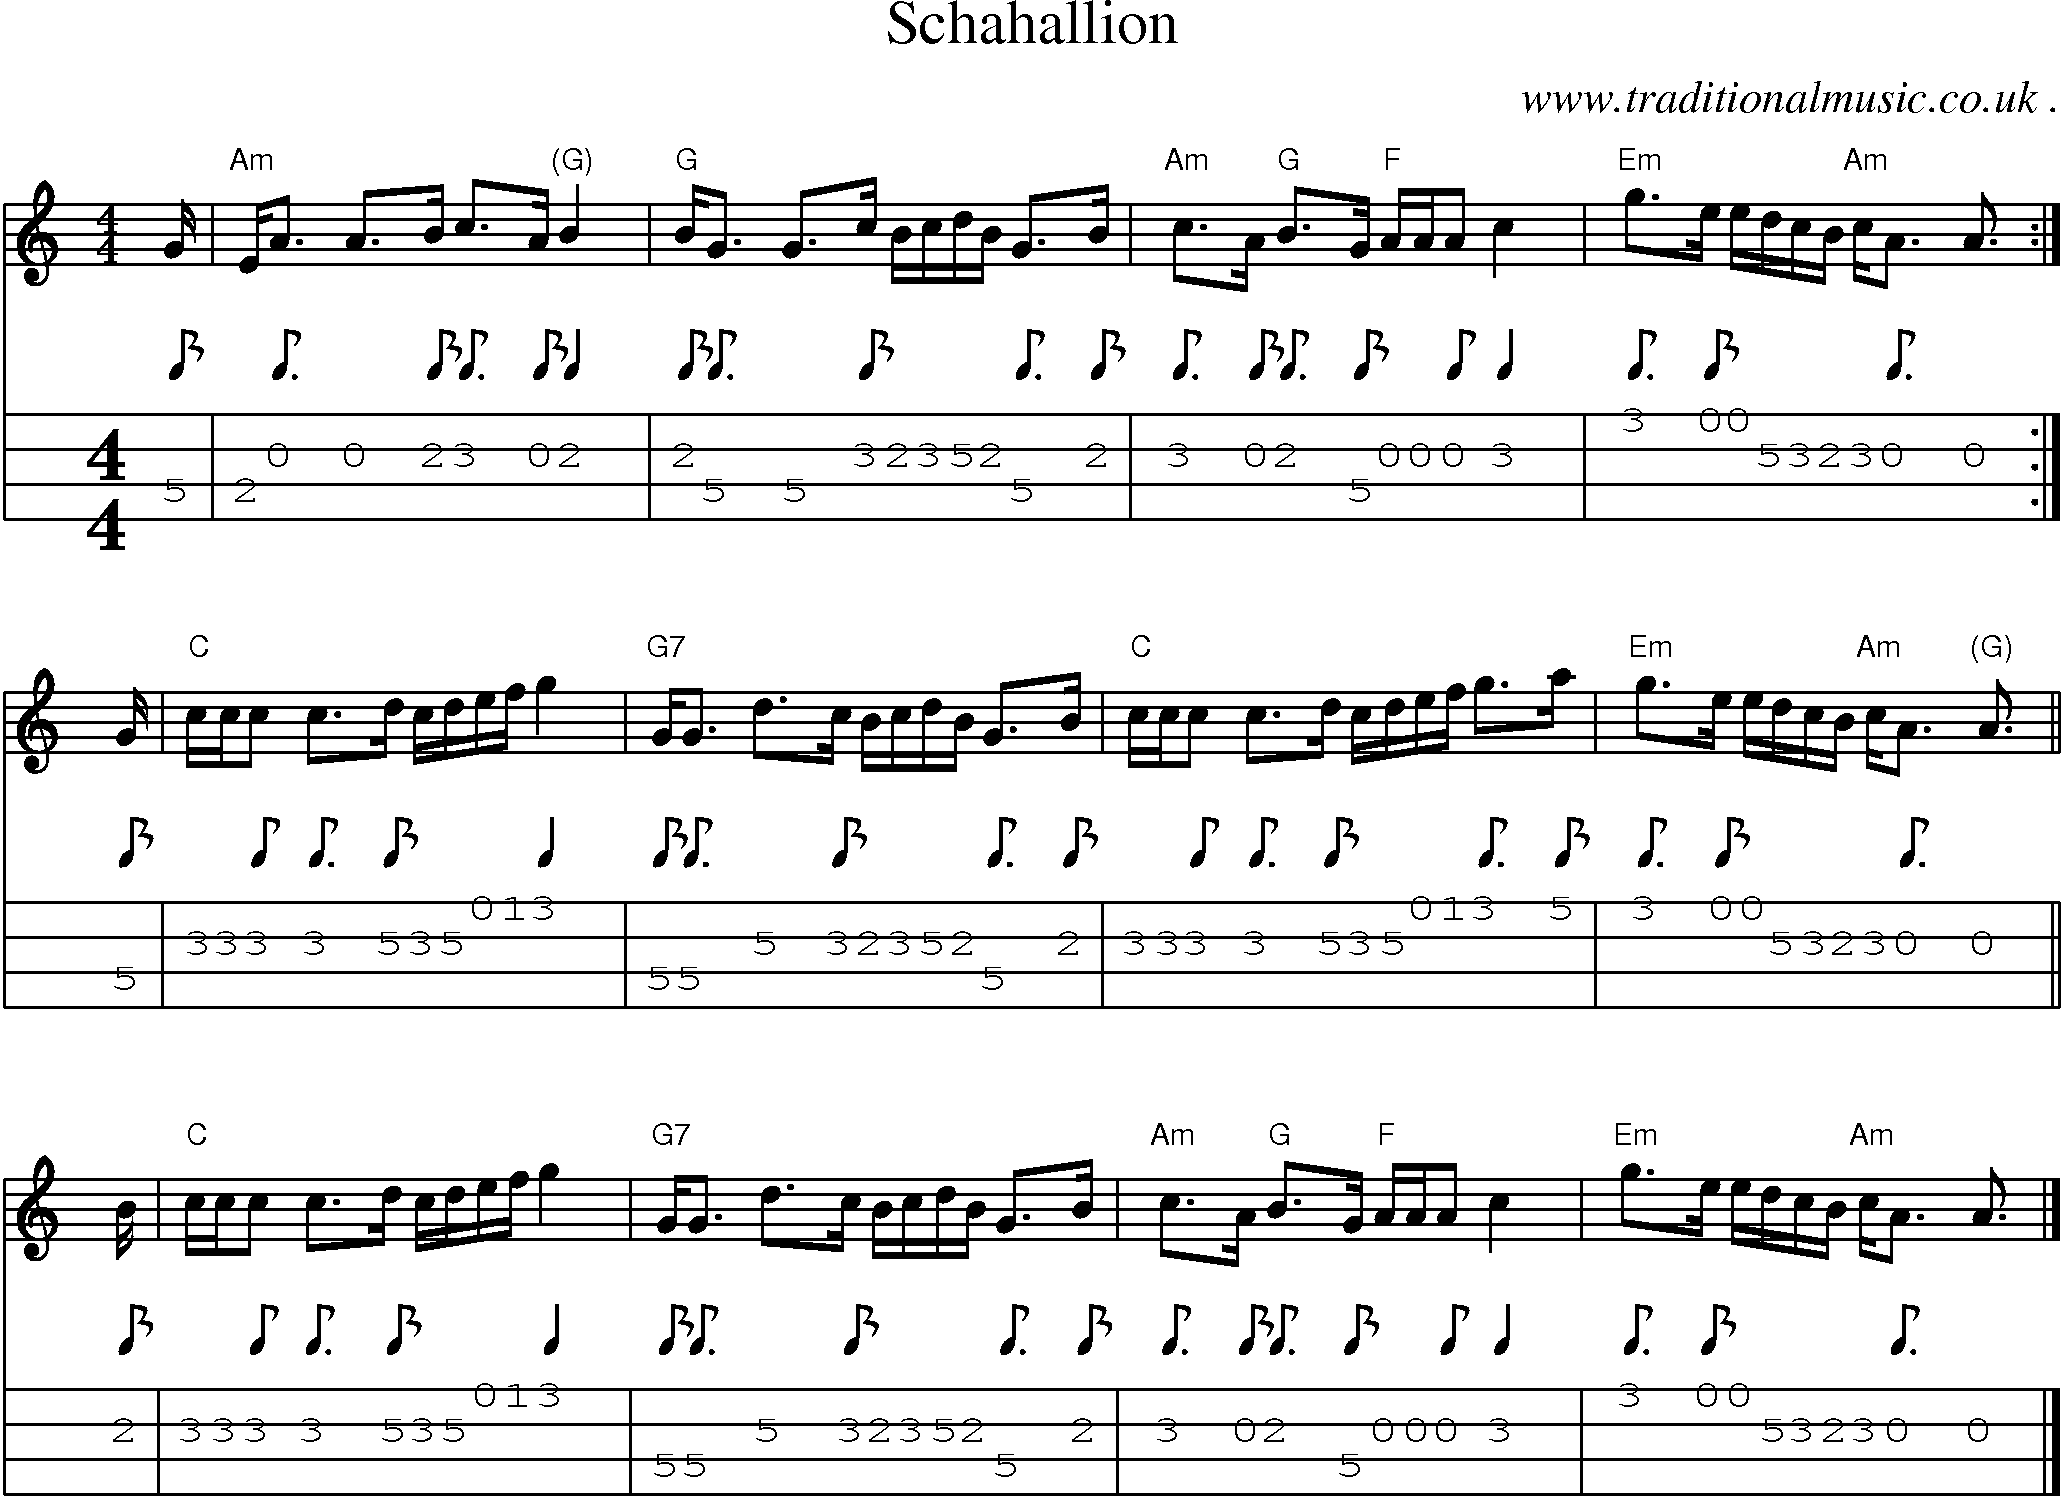 Sheet-music  score, Chords and Mandolin Tabs for Schahallion